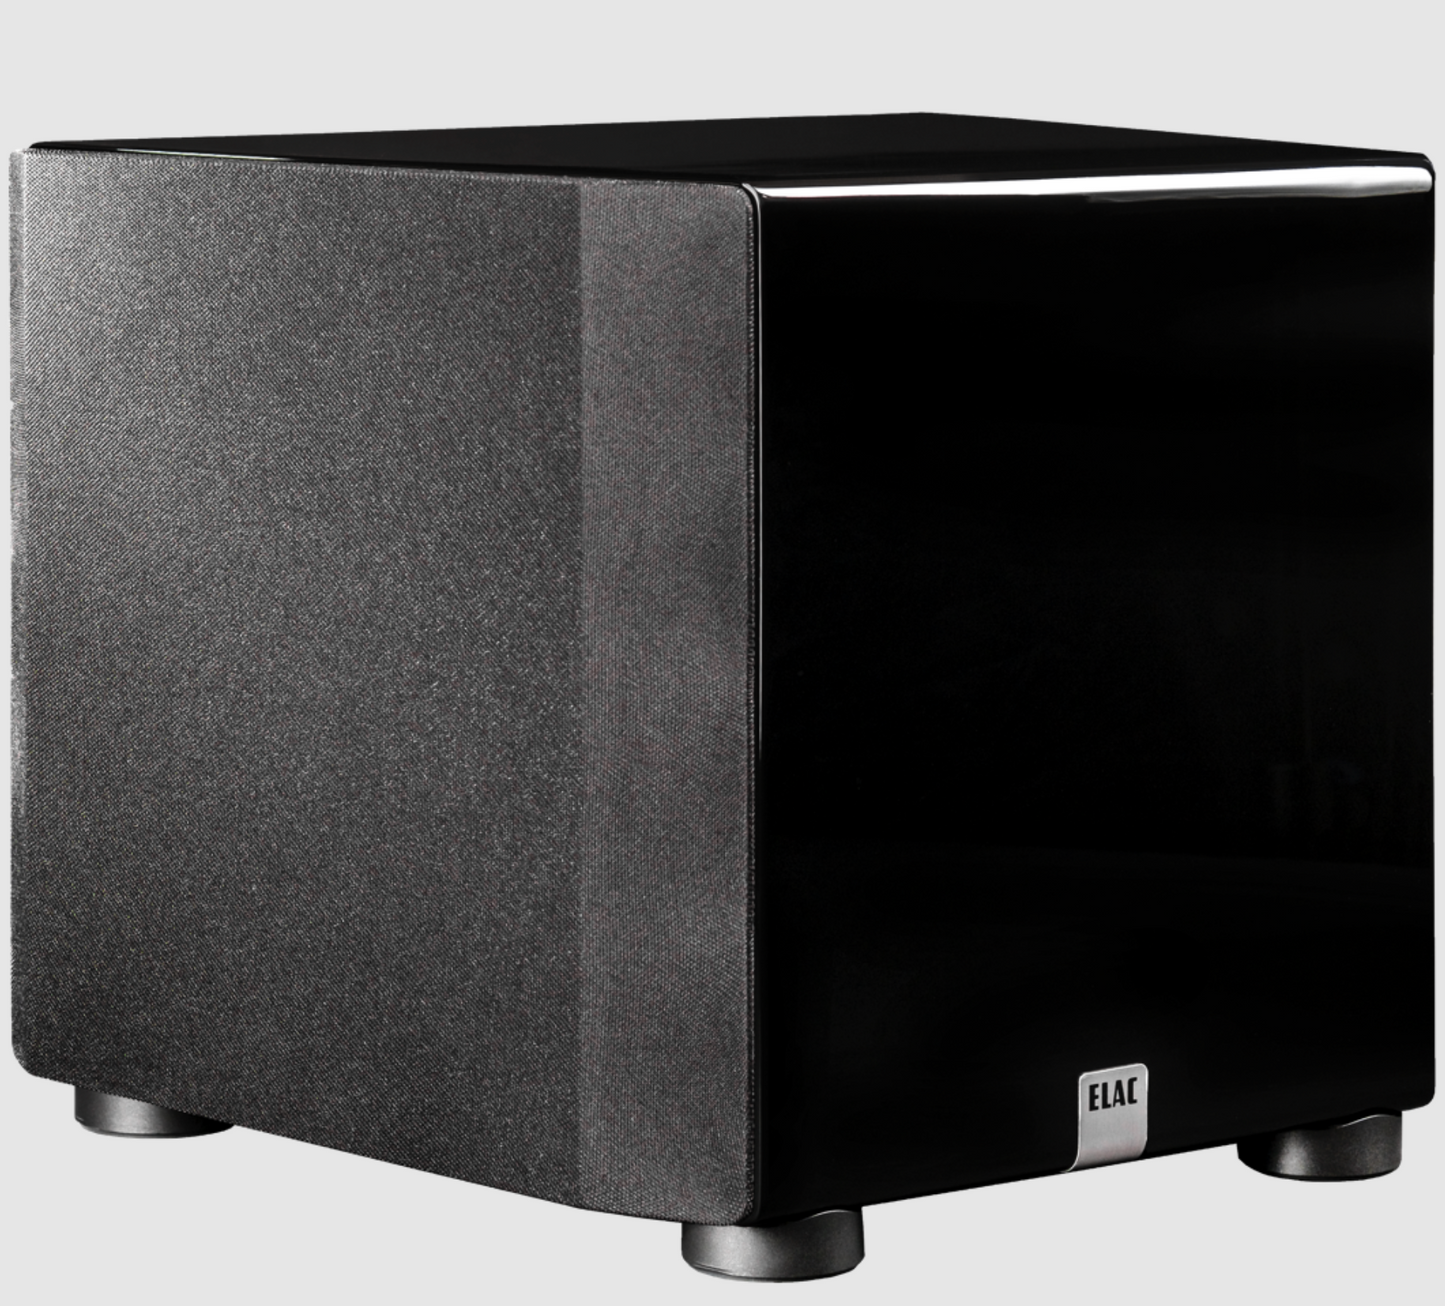 ELAC Varro DS1000 Dual Reference 10 Inch Subwoofer, angled image with grille